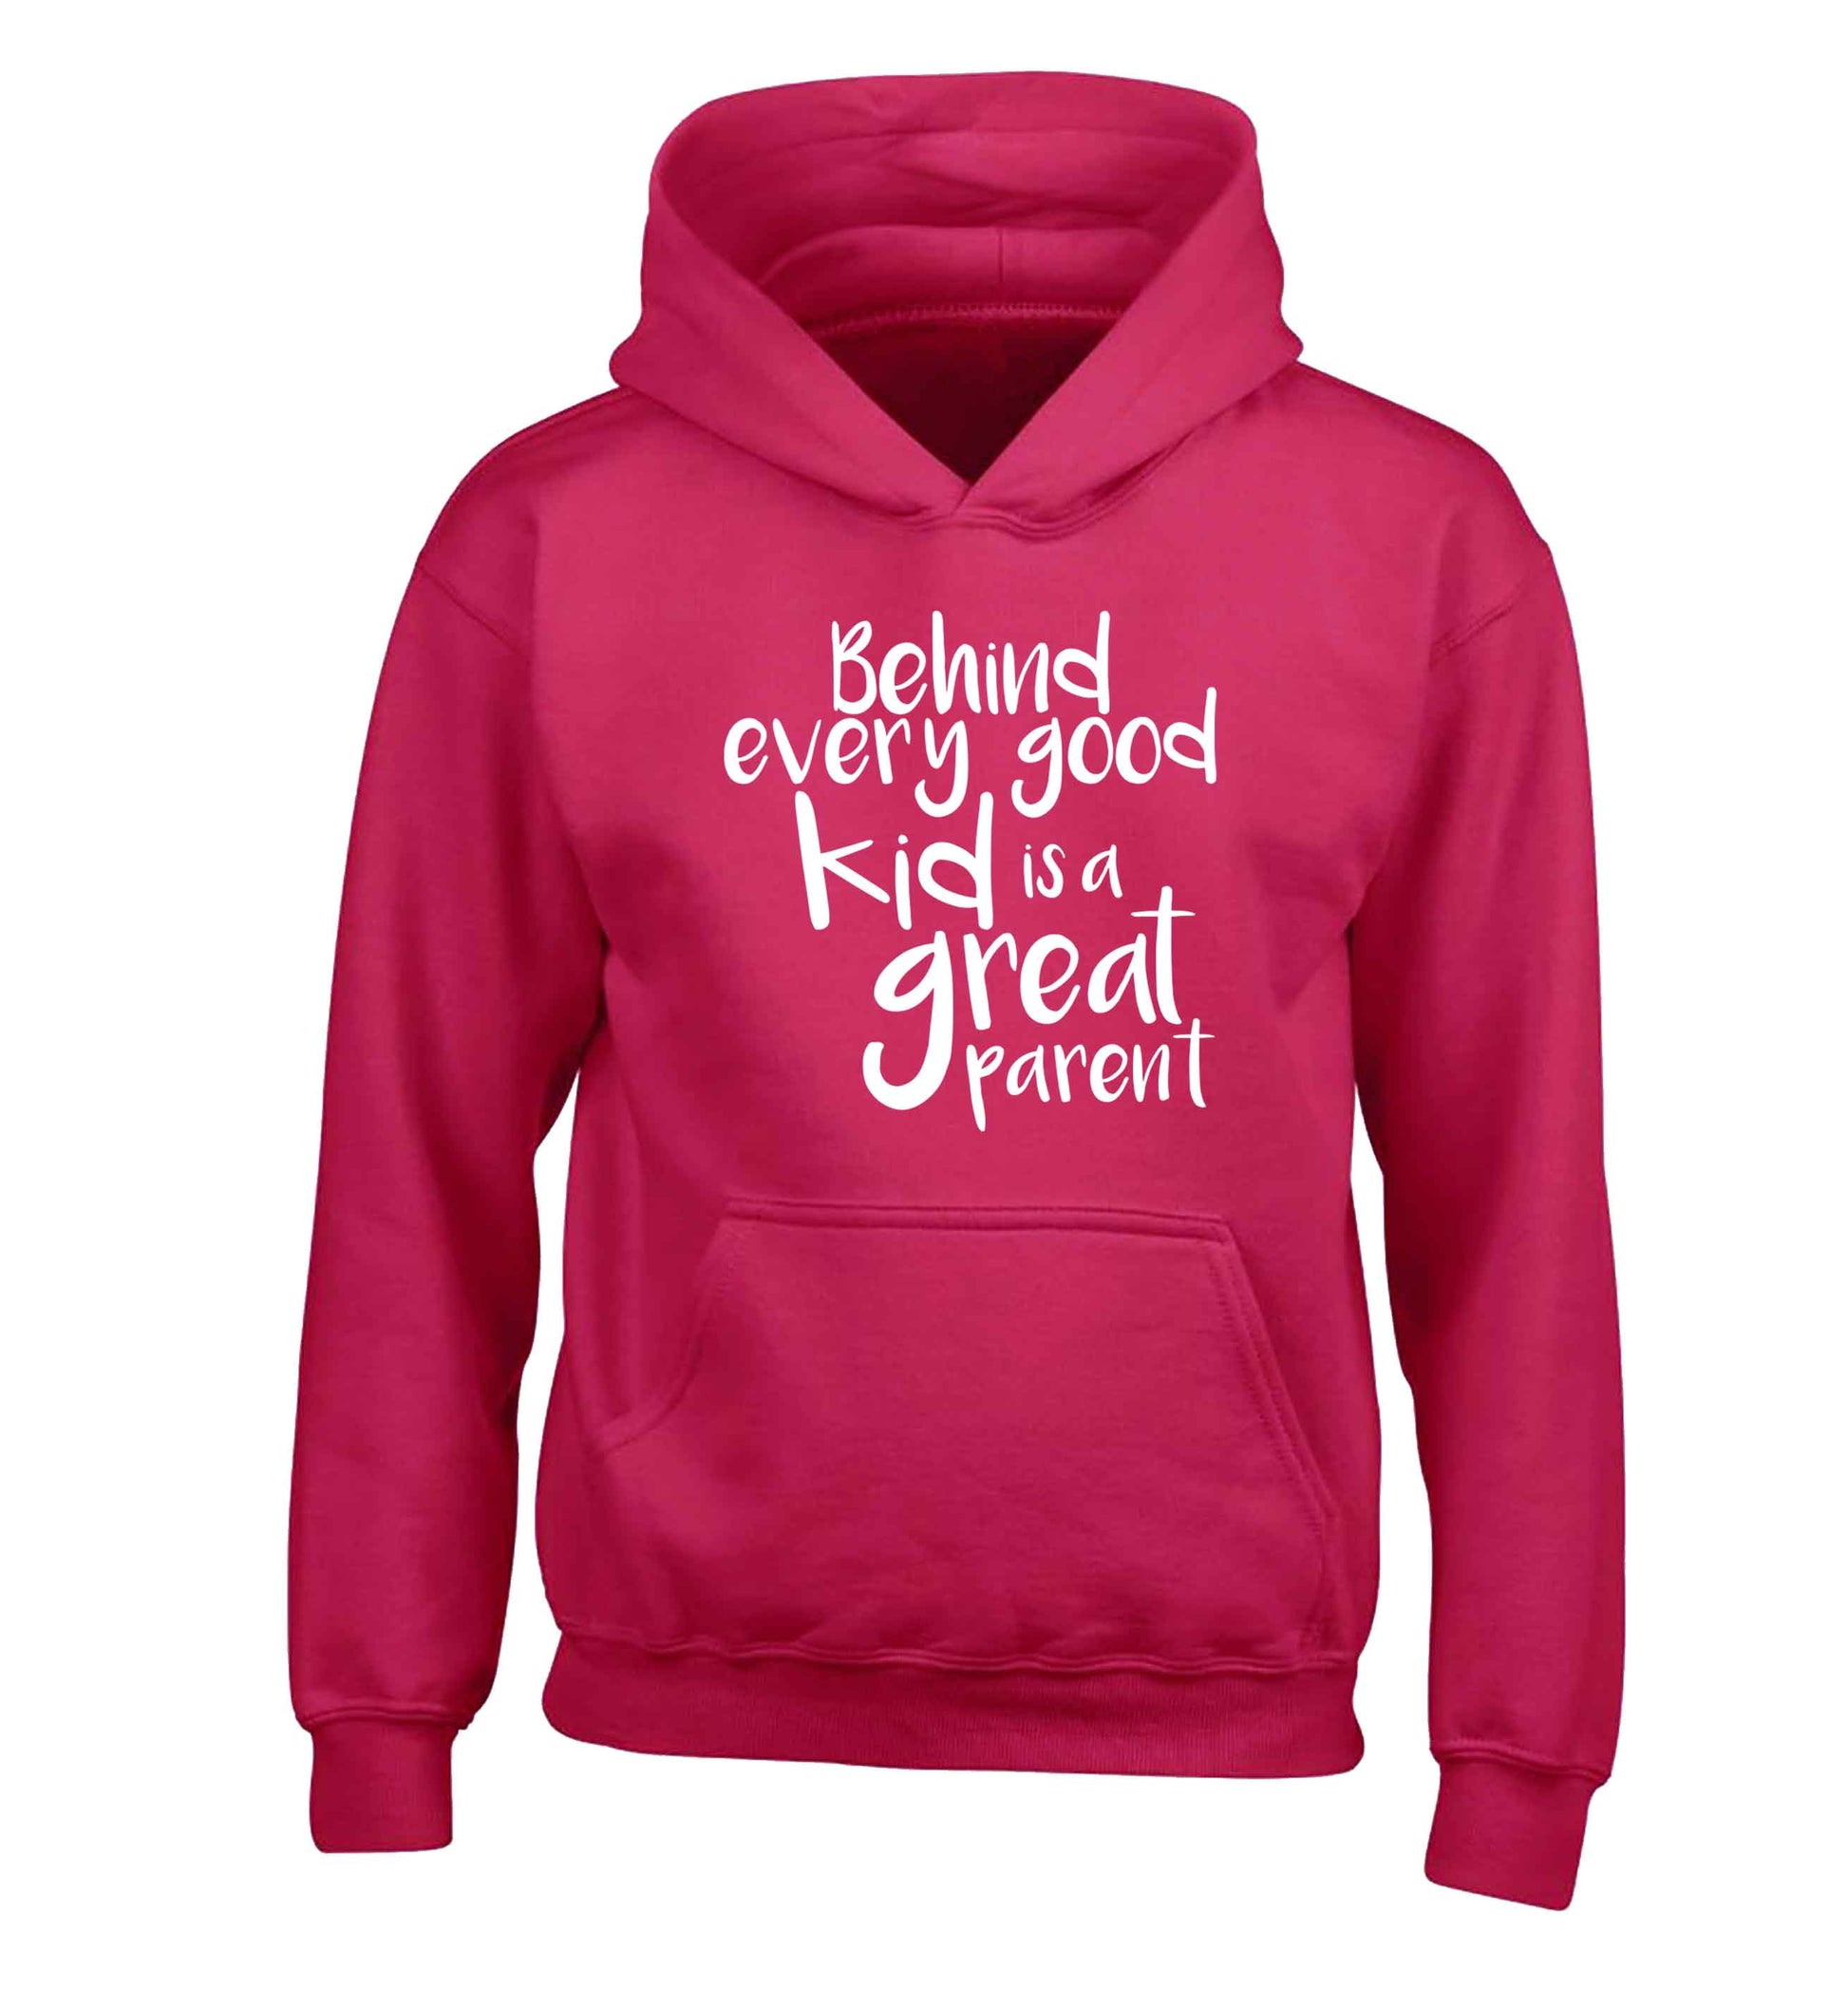 Behind every good kid is a great parent children's pink hoodie 12-13 Years